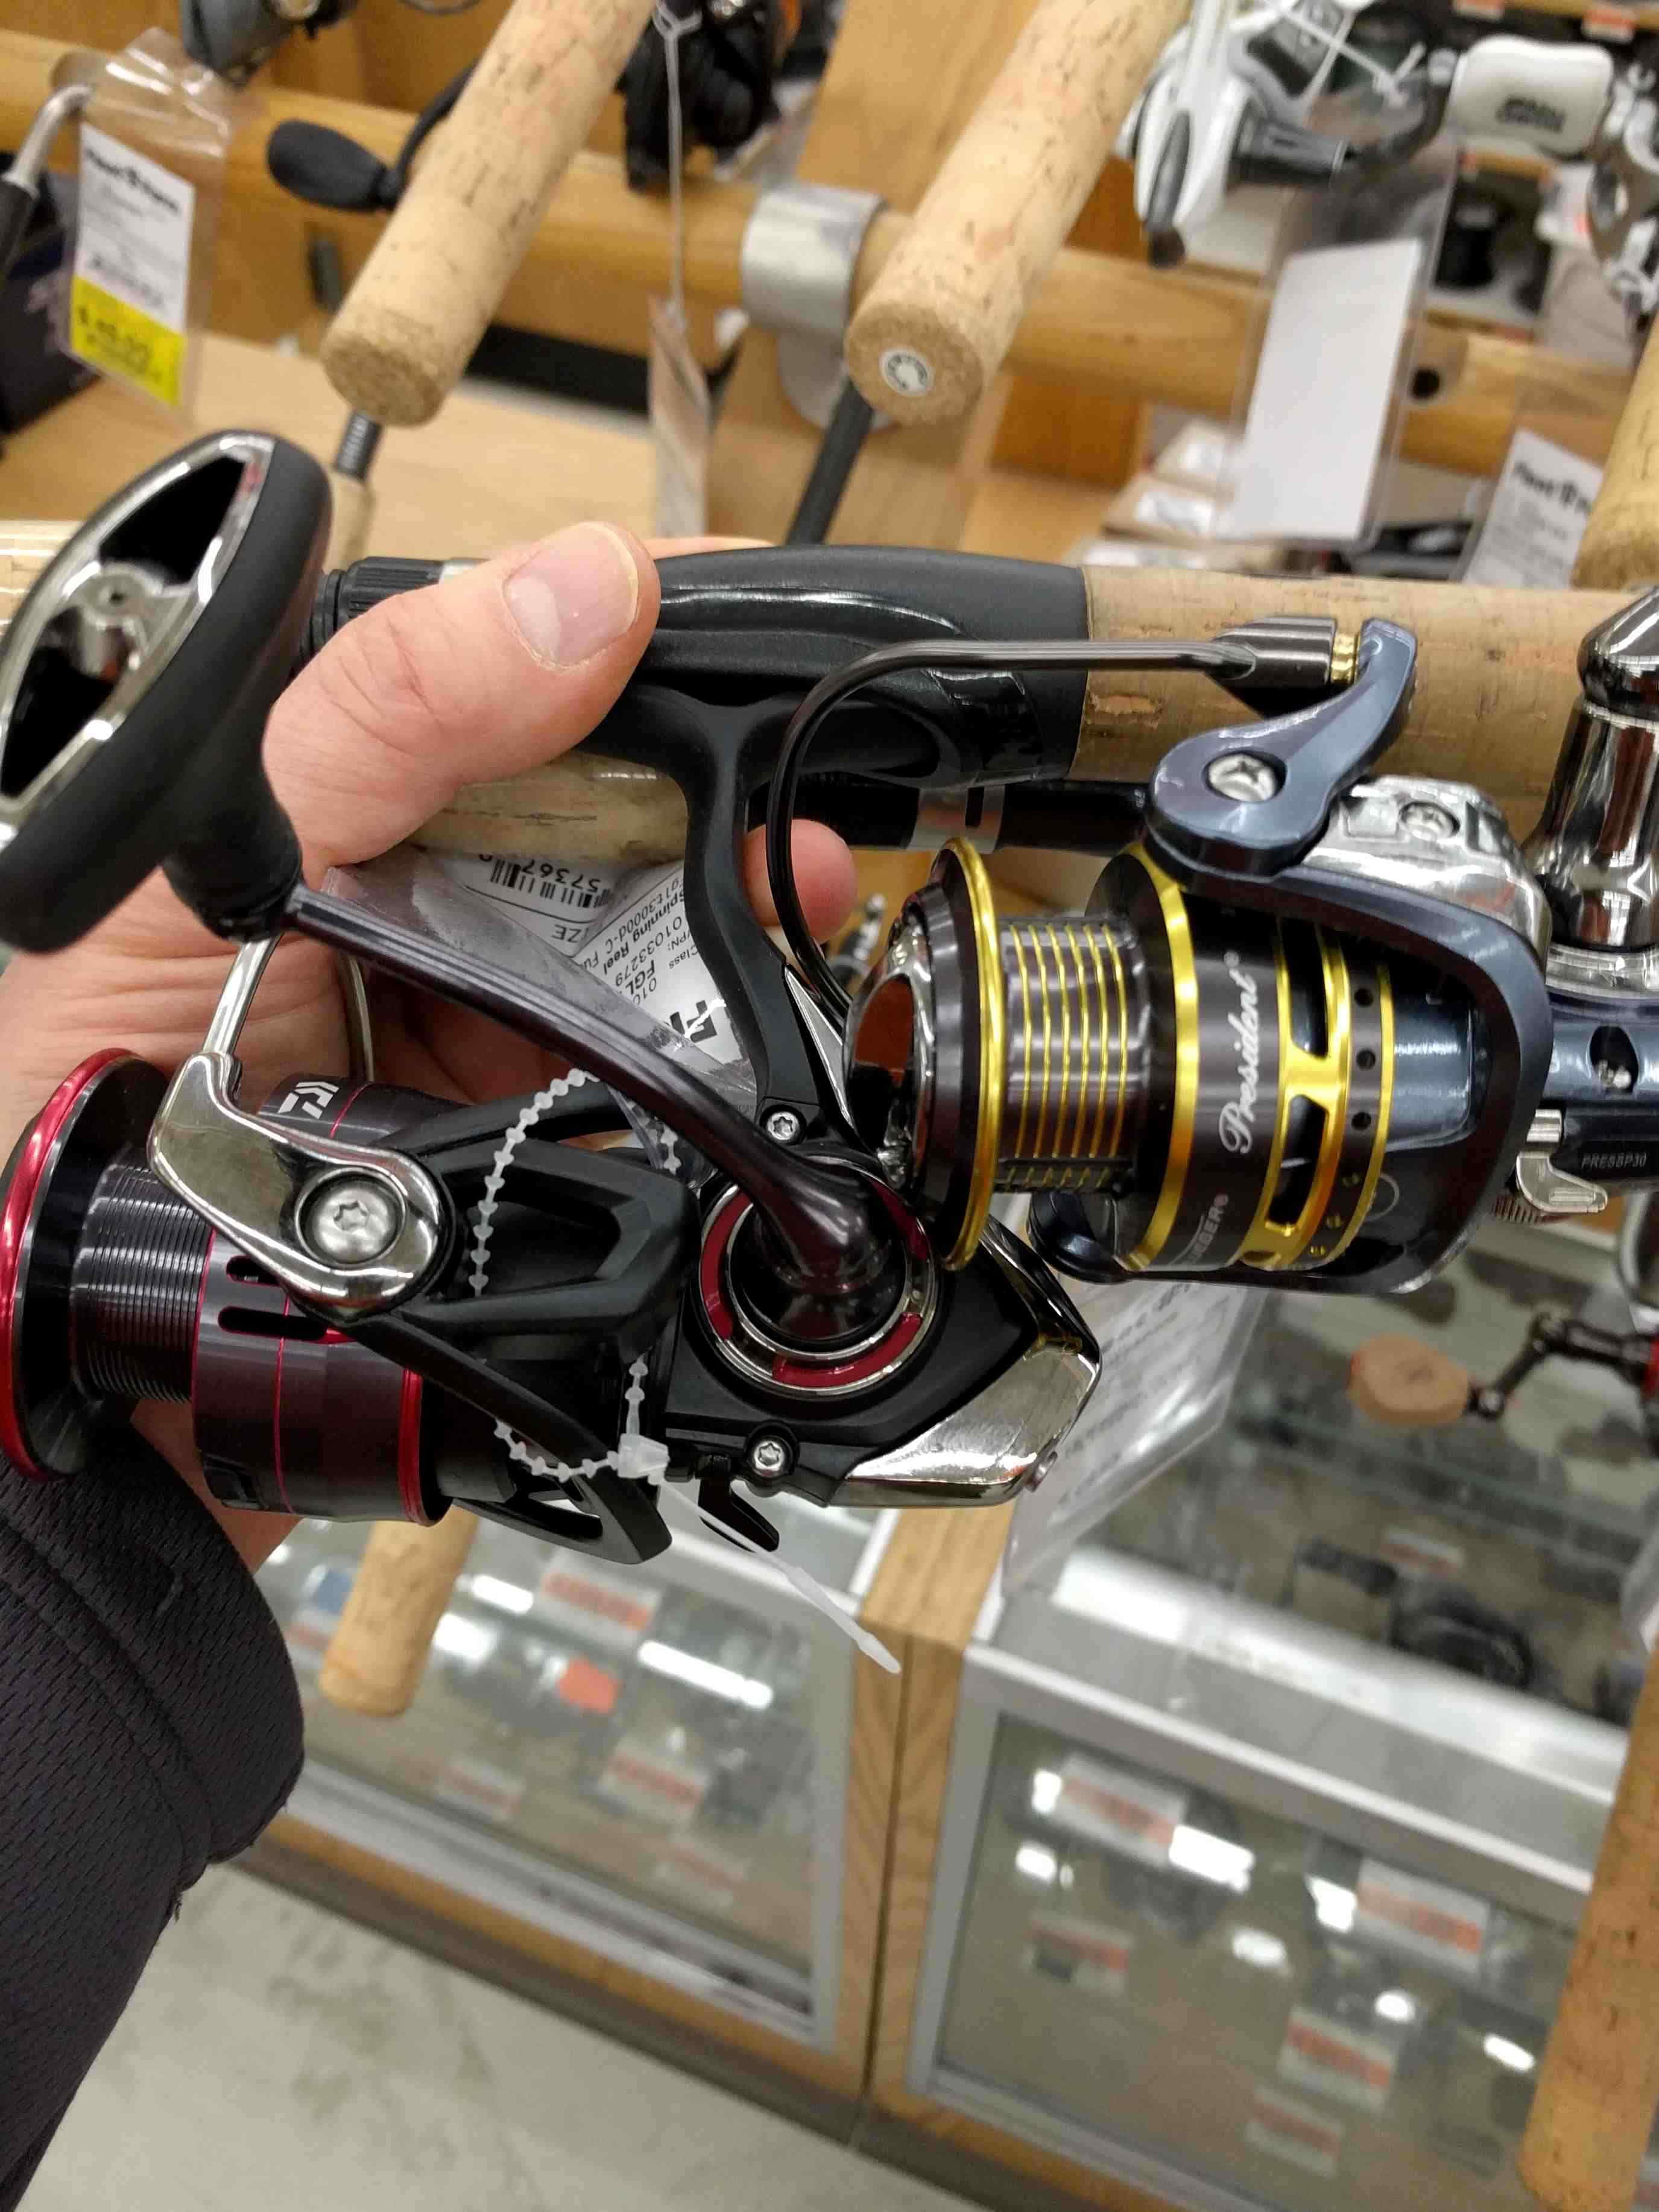 Why is this DAIWA reel $109.99 cost more than the Pflueger $69.95